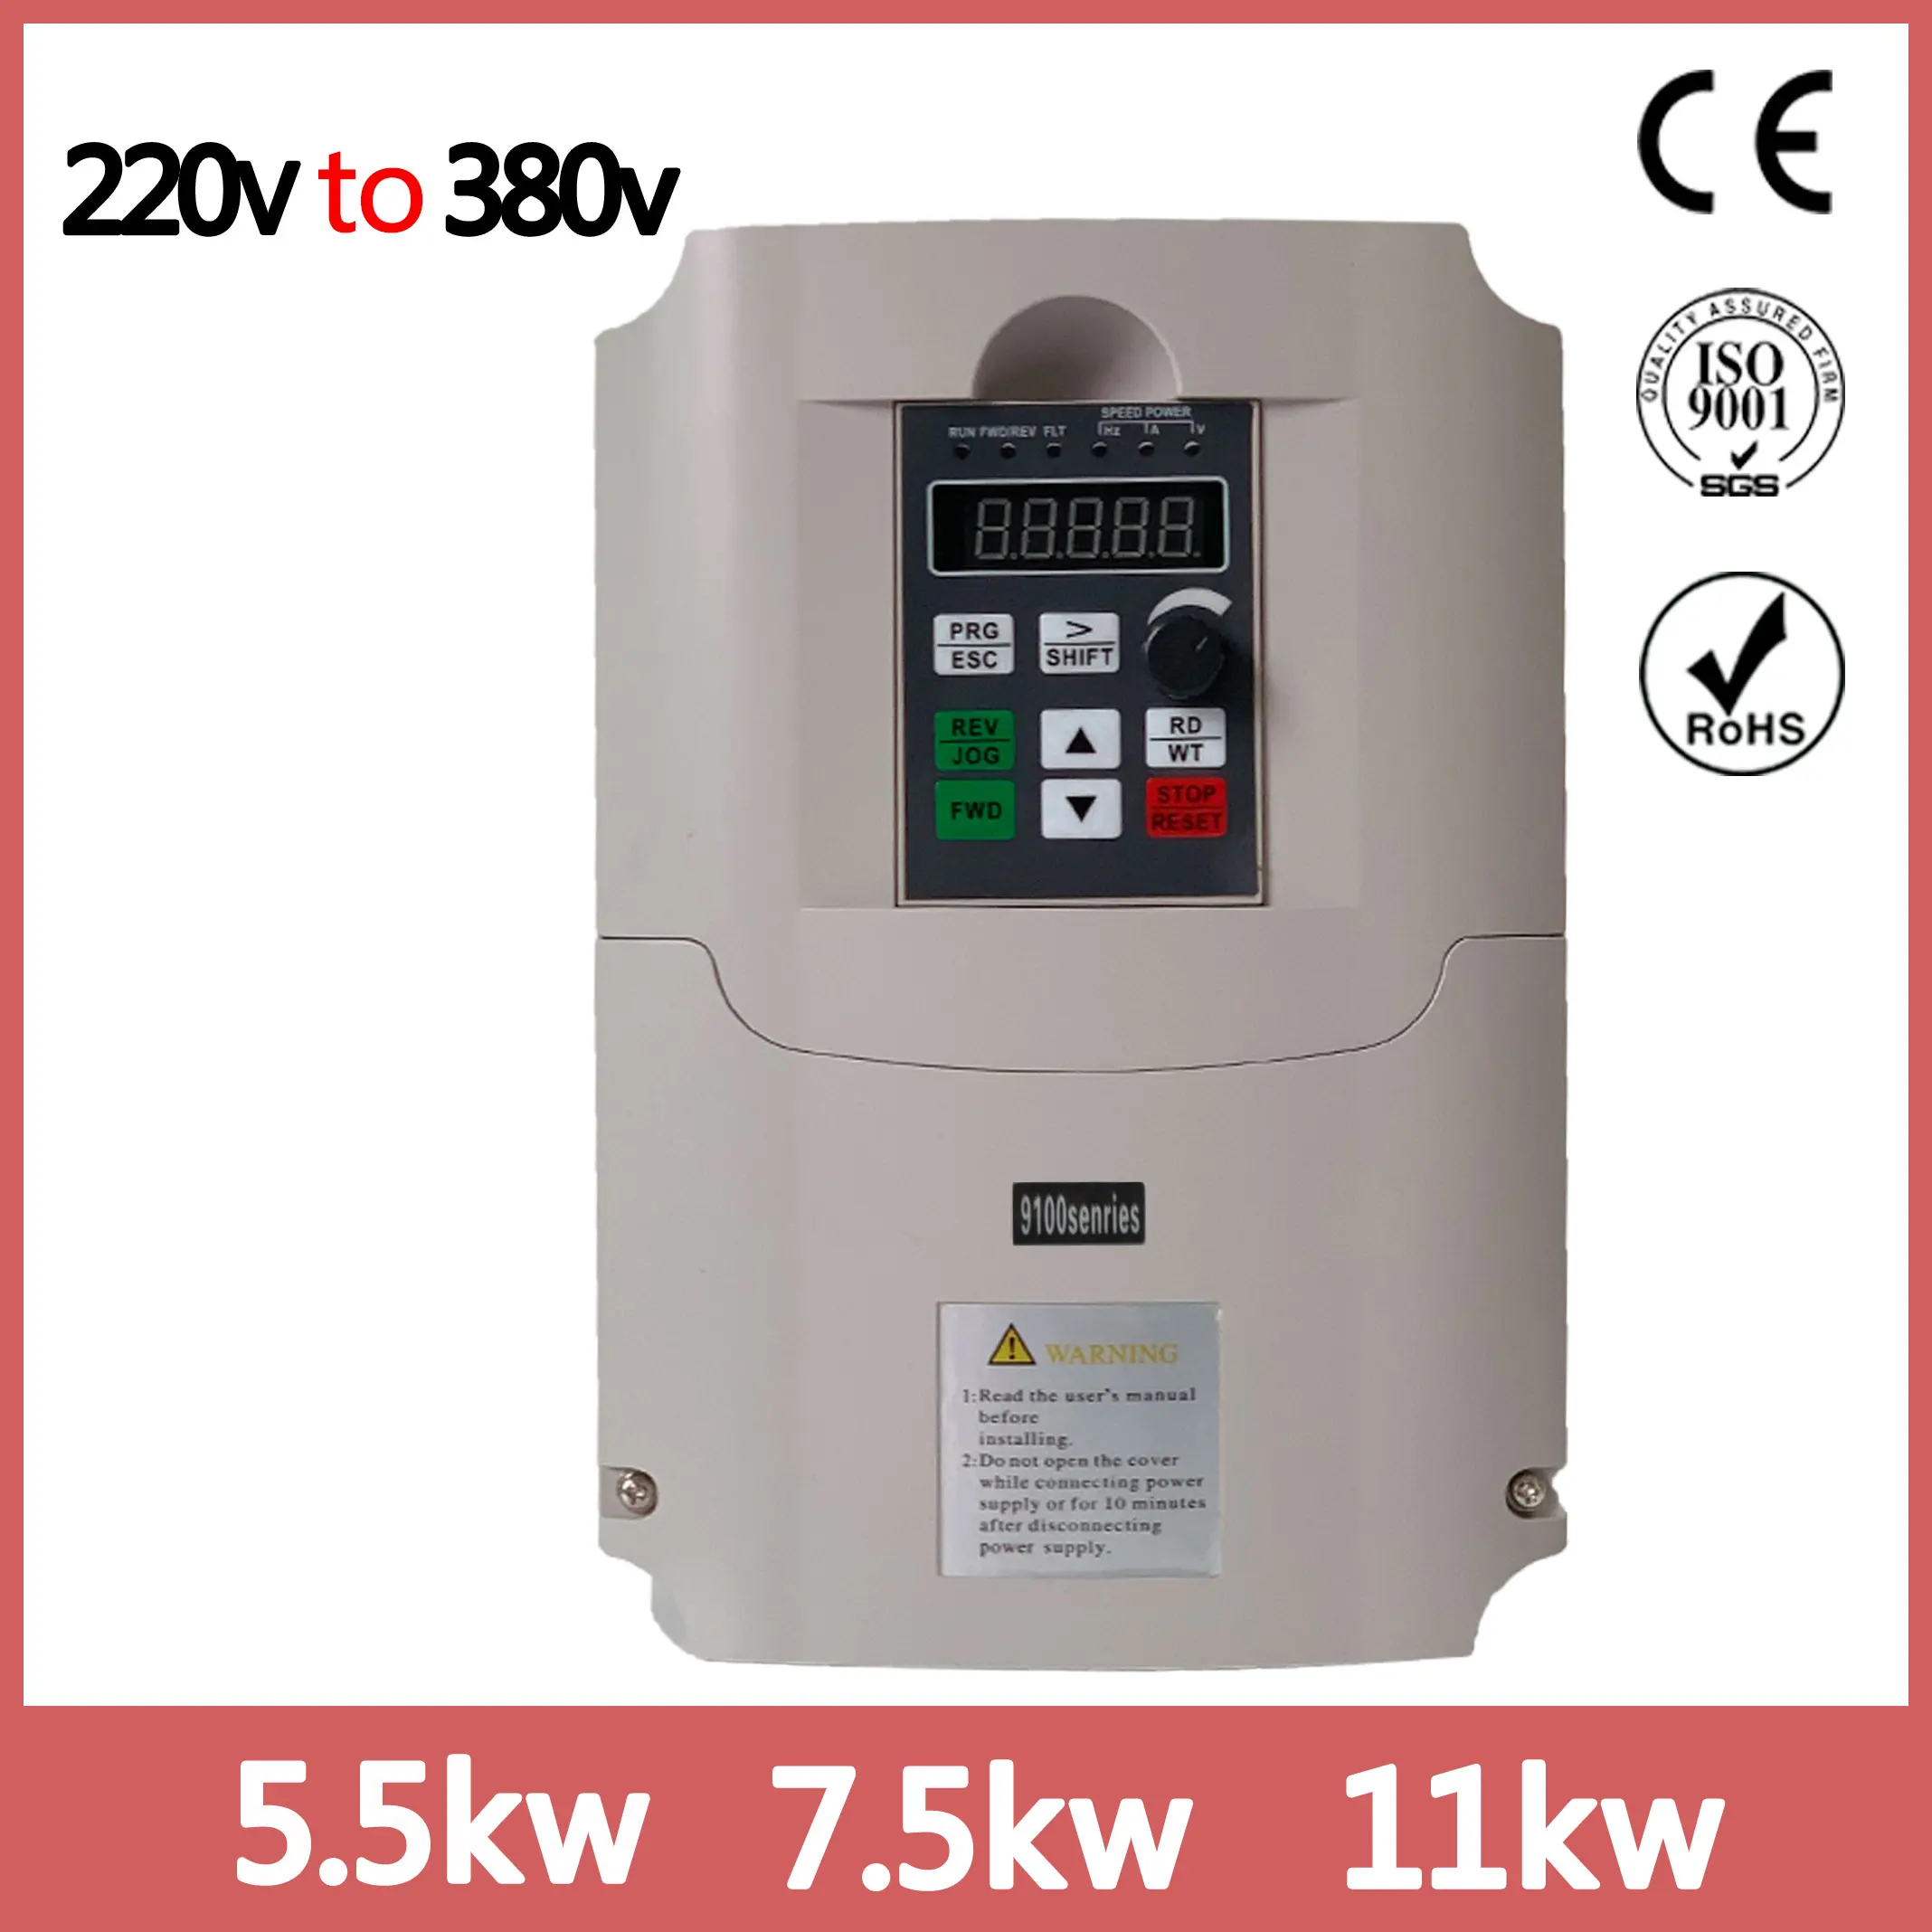 Nflixin Spindle Inverter 7.5kw Single Phase 220v Output Three-phase 380v  Frequency Converter - Inverters & Converters - AliExpress